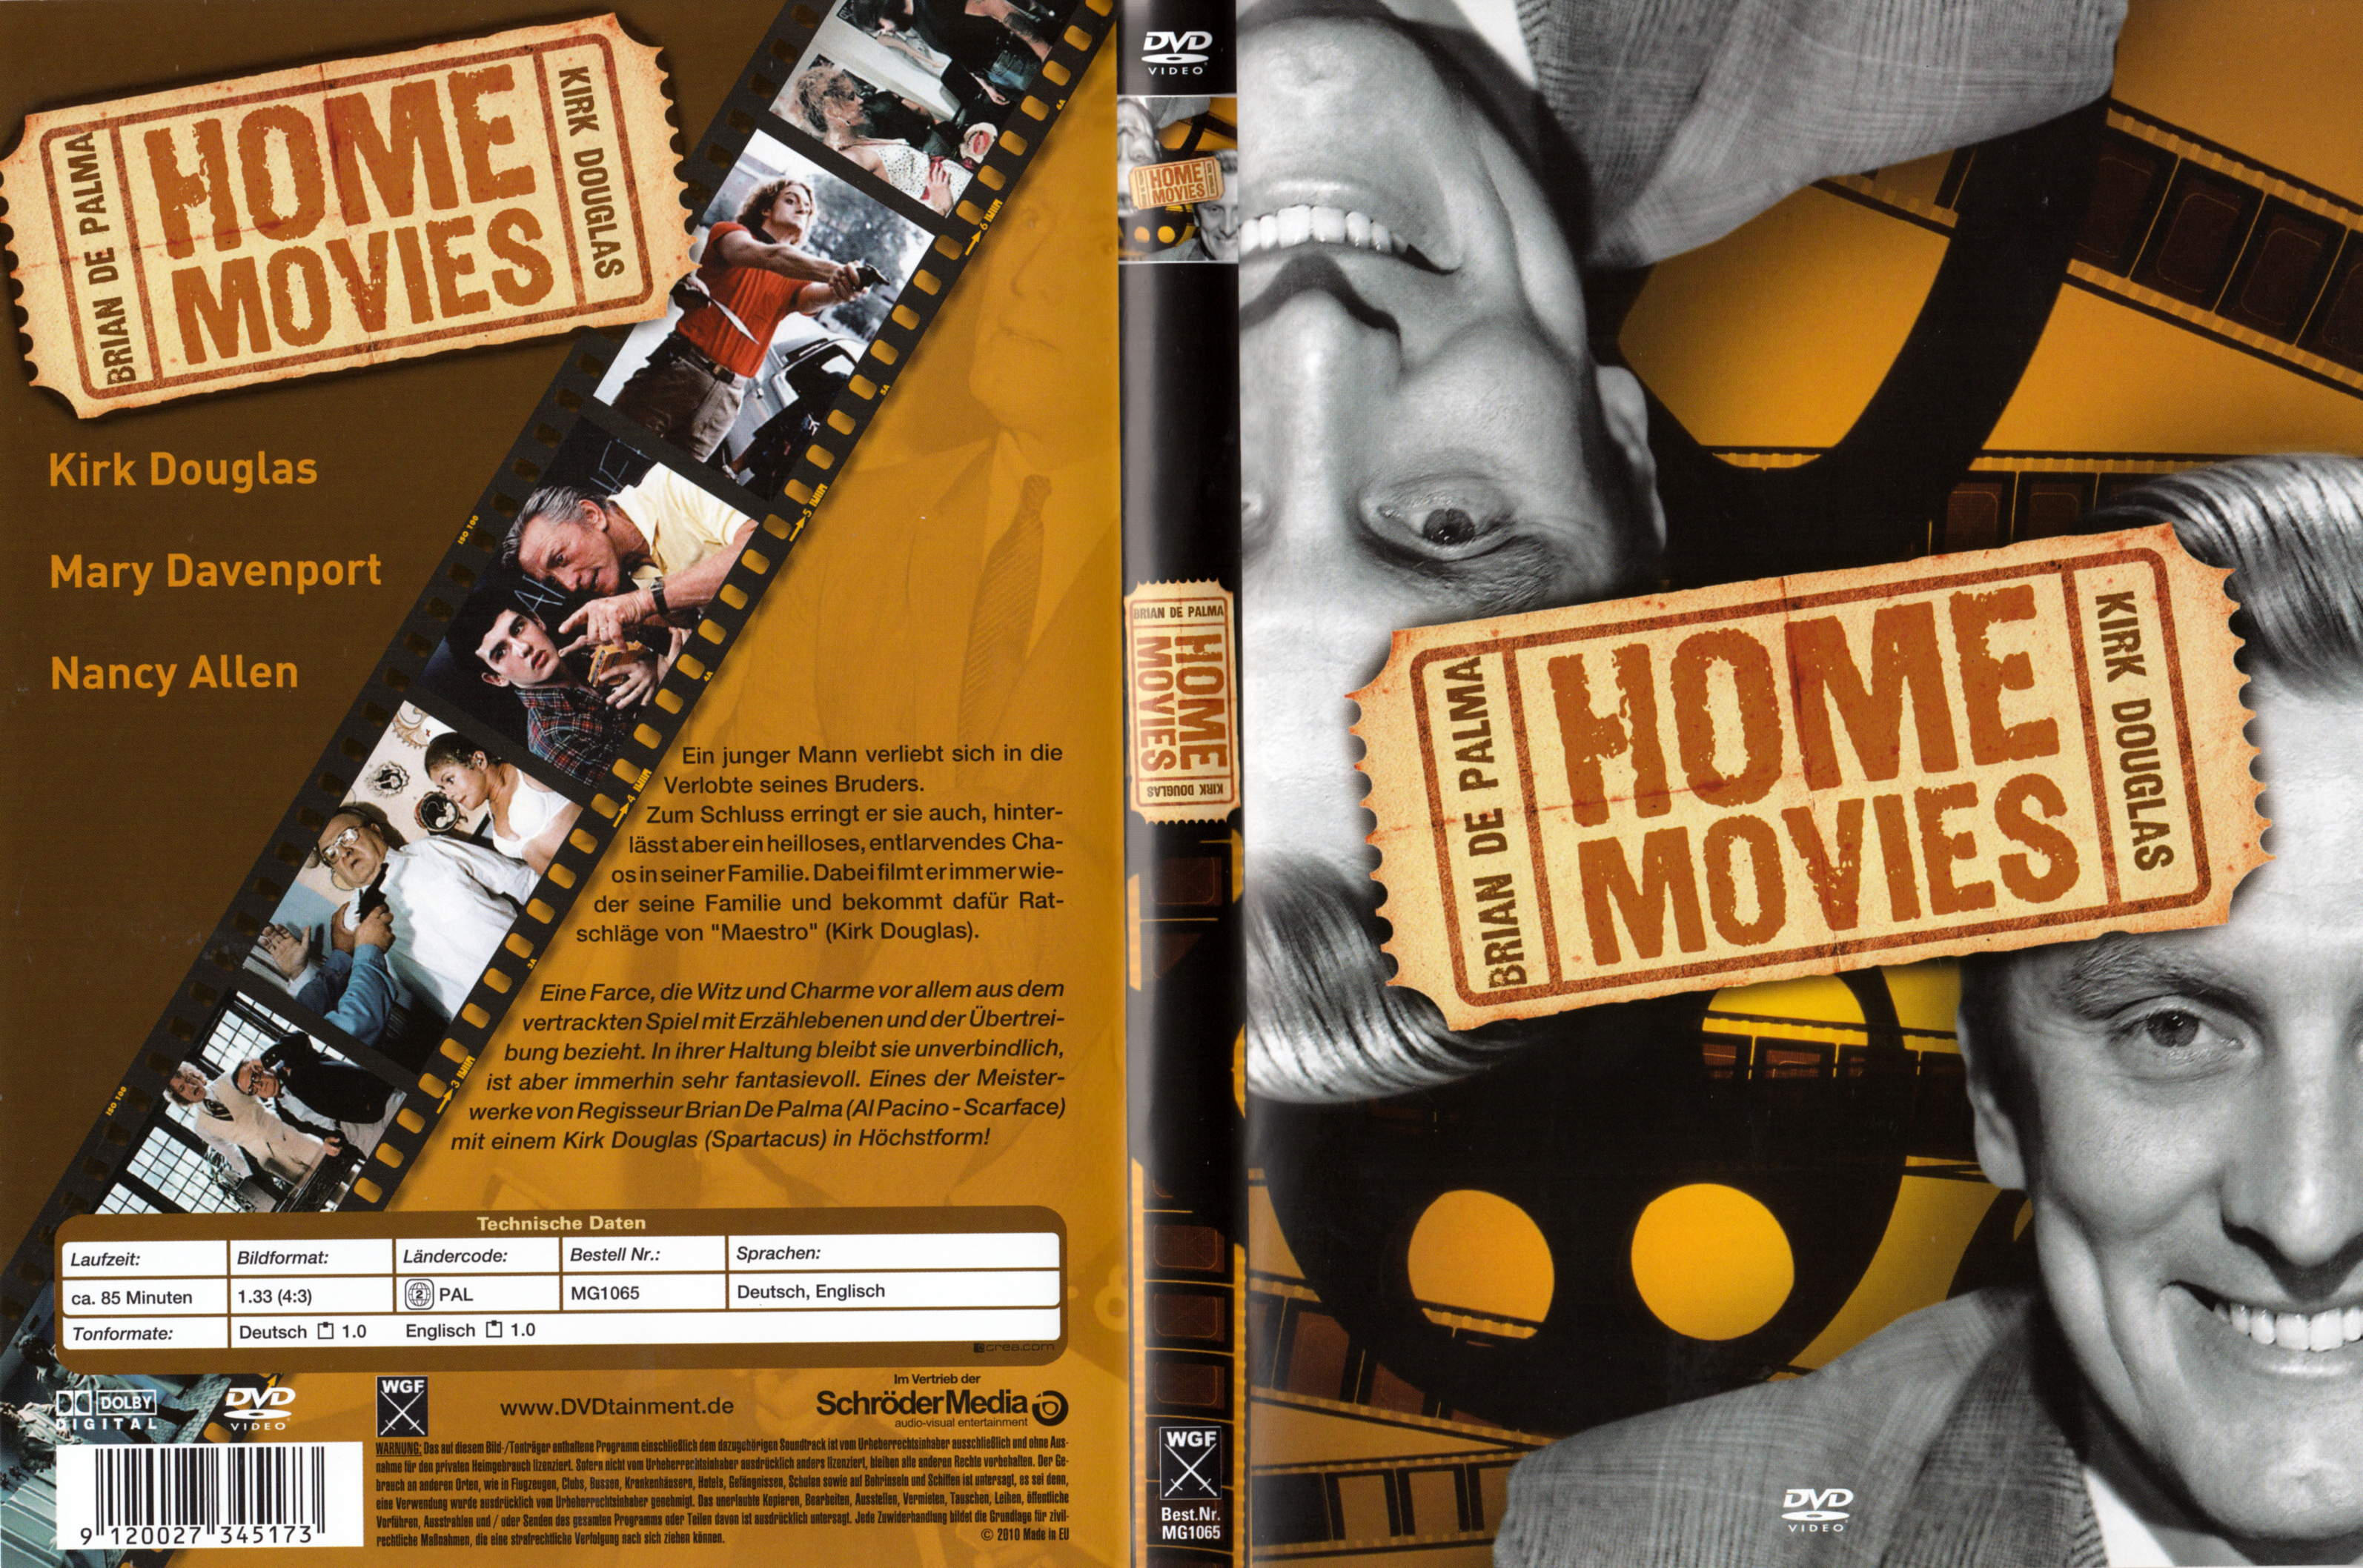 Jaquette DVD Home movie